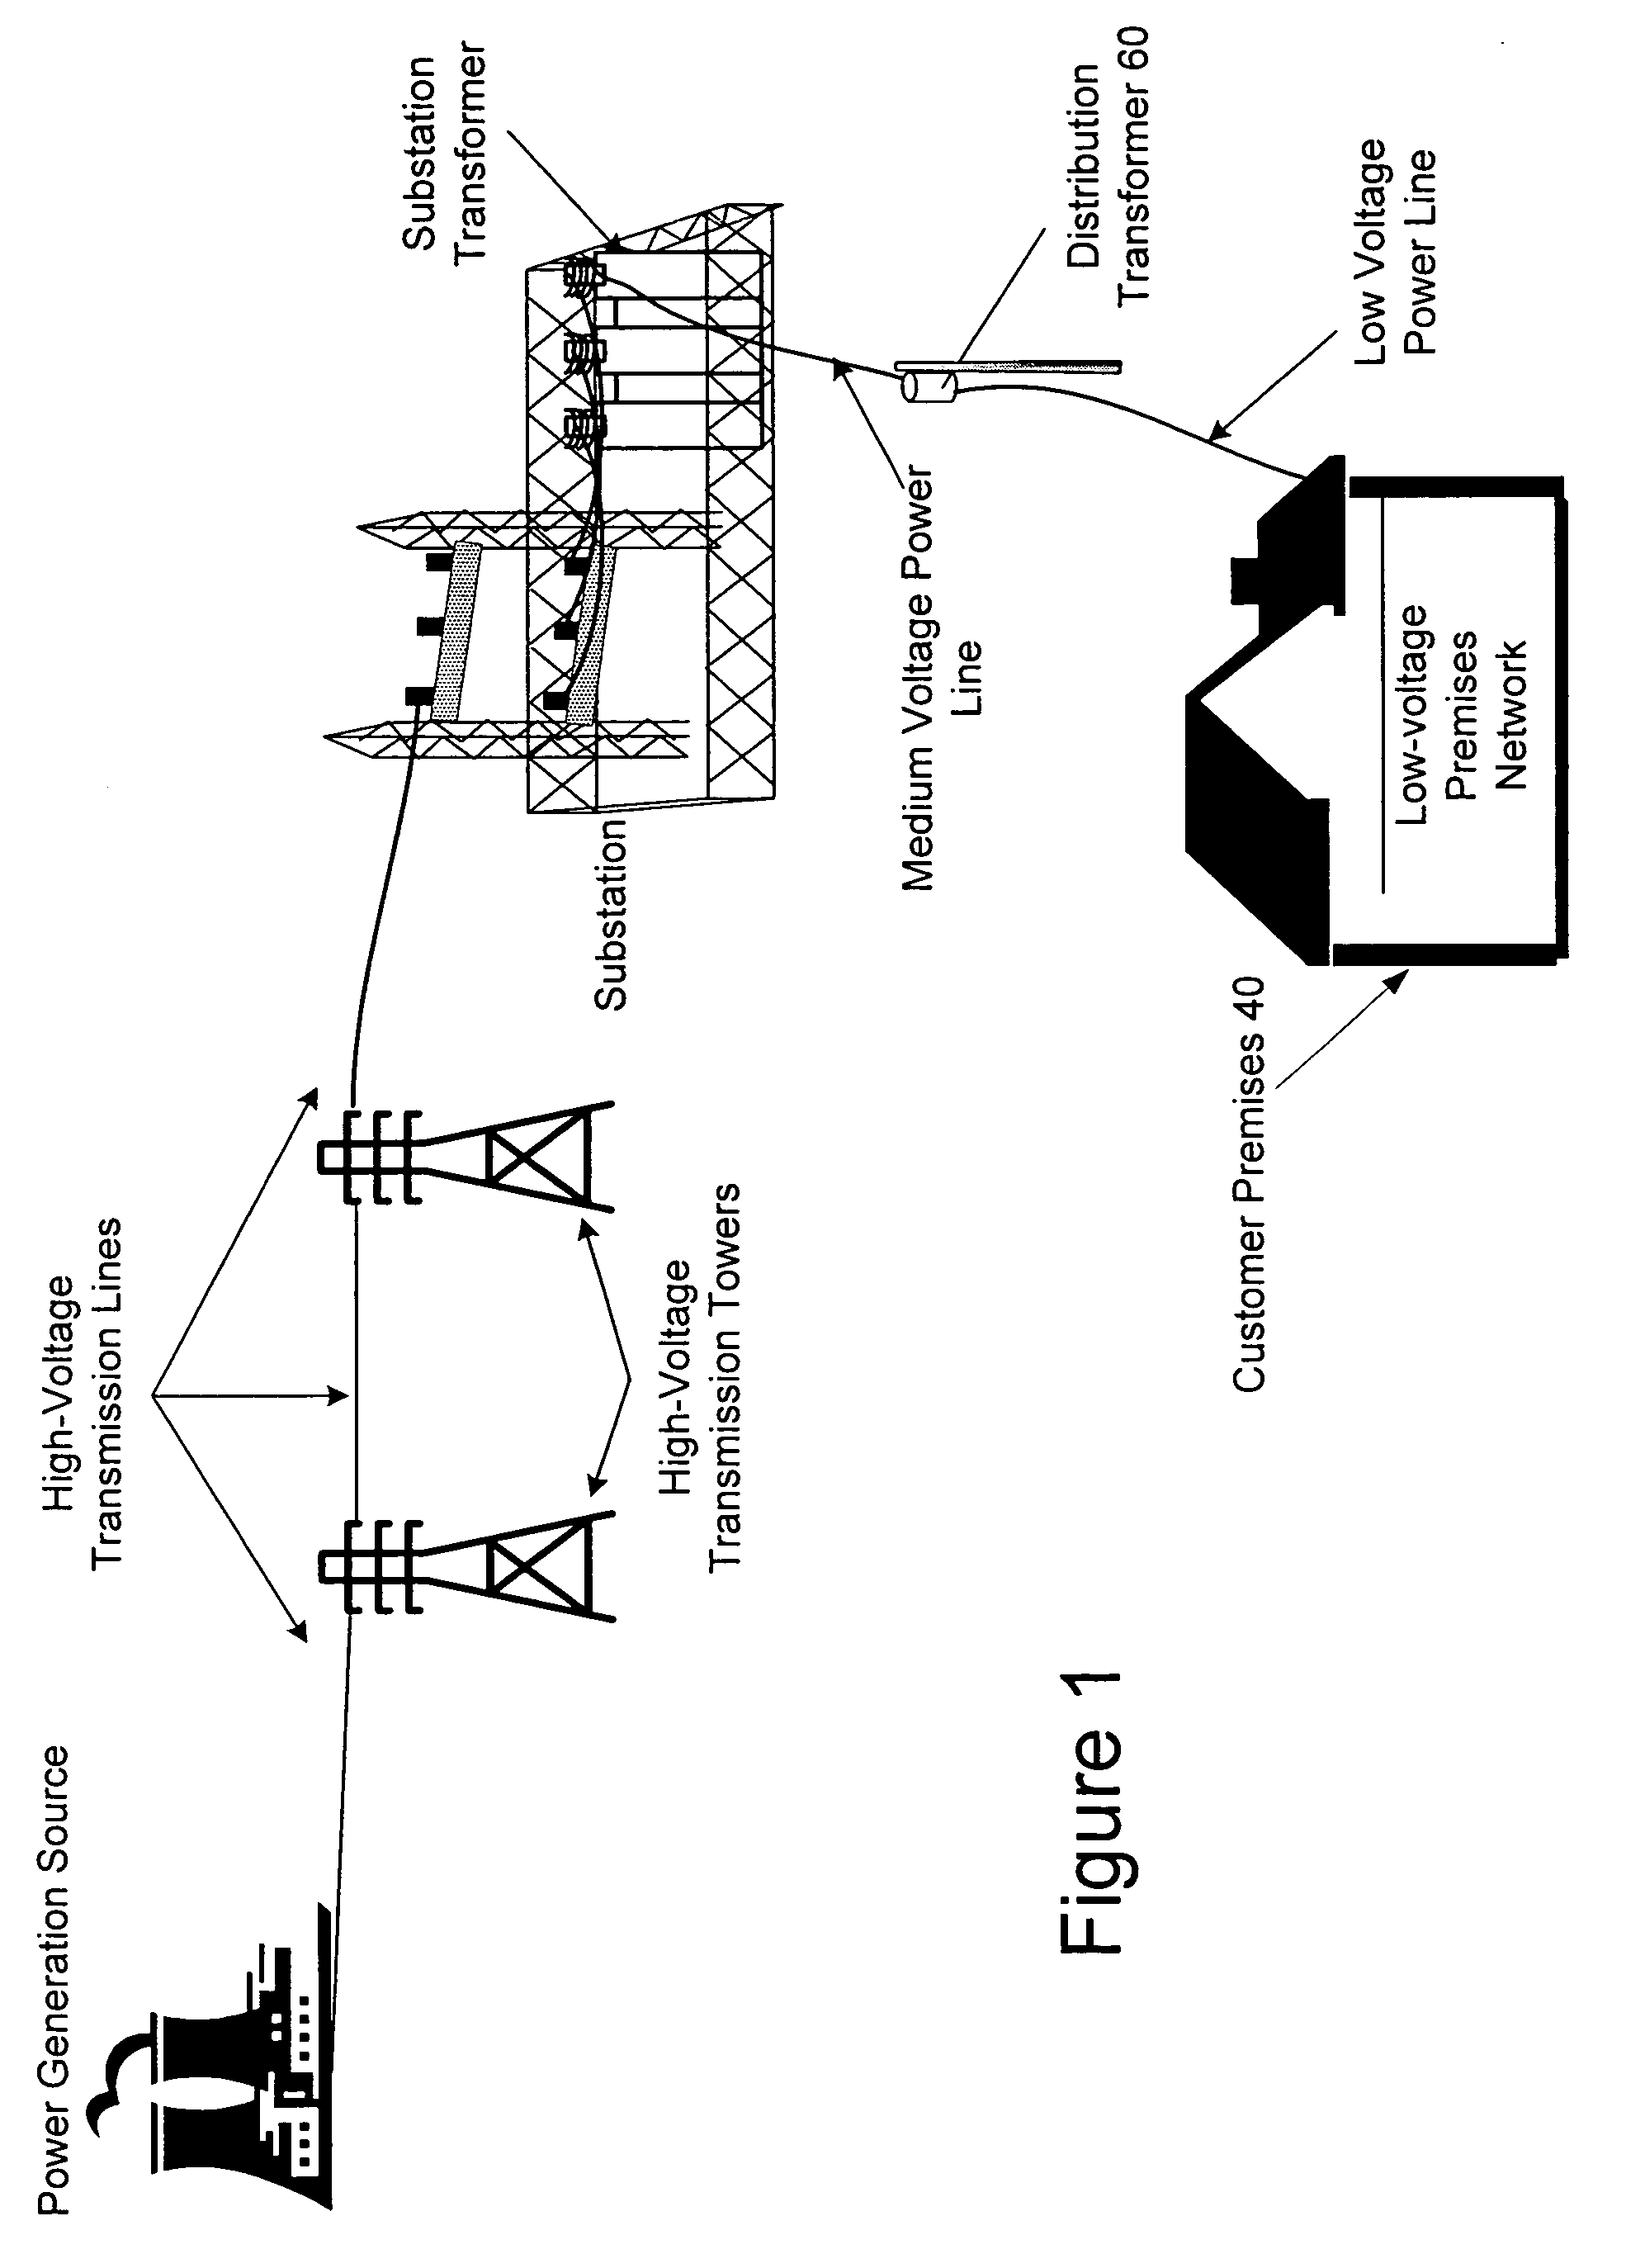 Power line communication rate limiting system and method